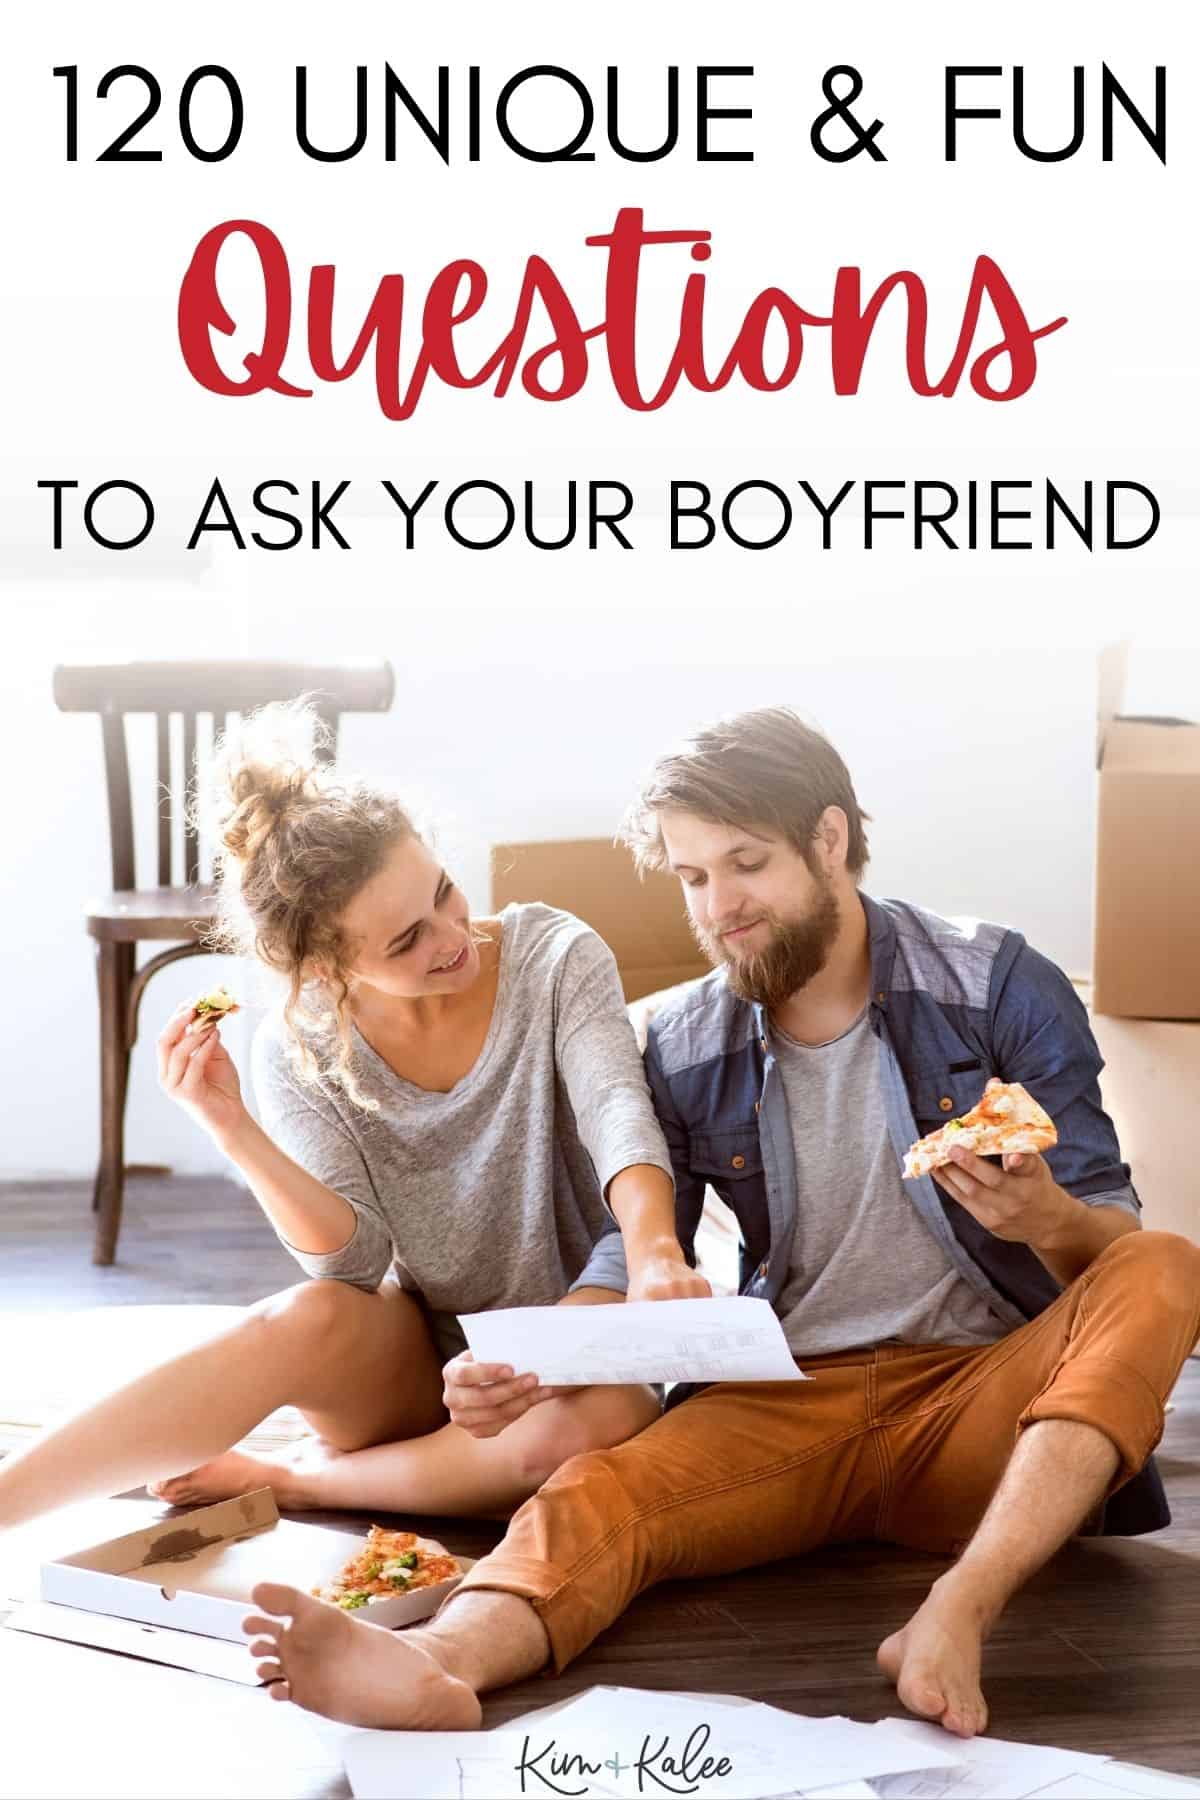 a couple looking over a piece of paper while eating pizza with the words "120 unique and fun questions to ask your boyfriend" over the top of the image